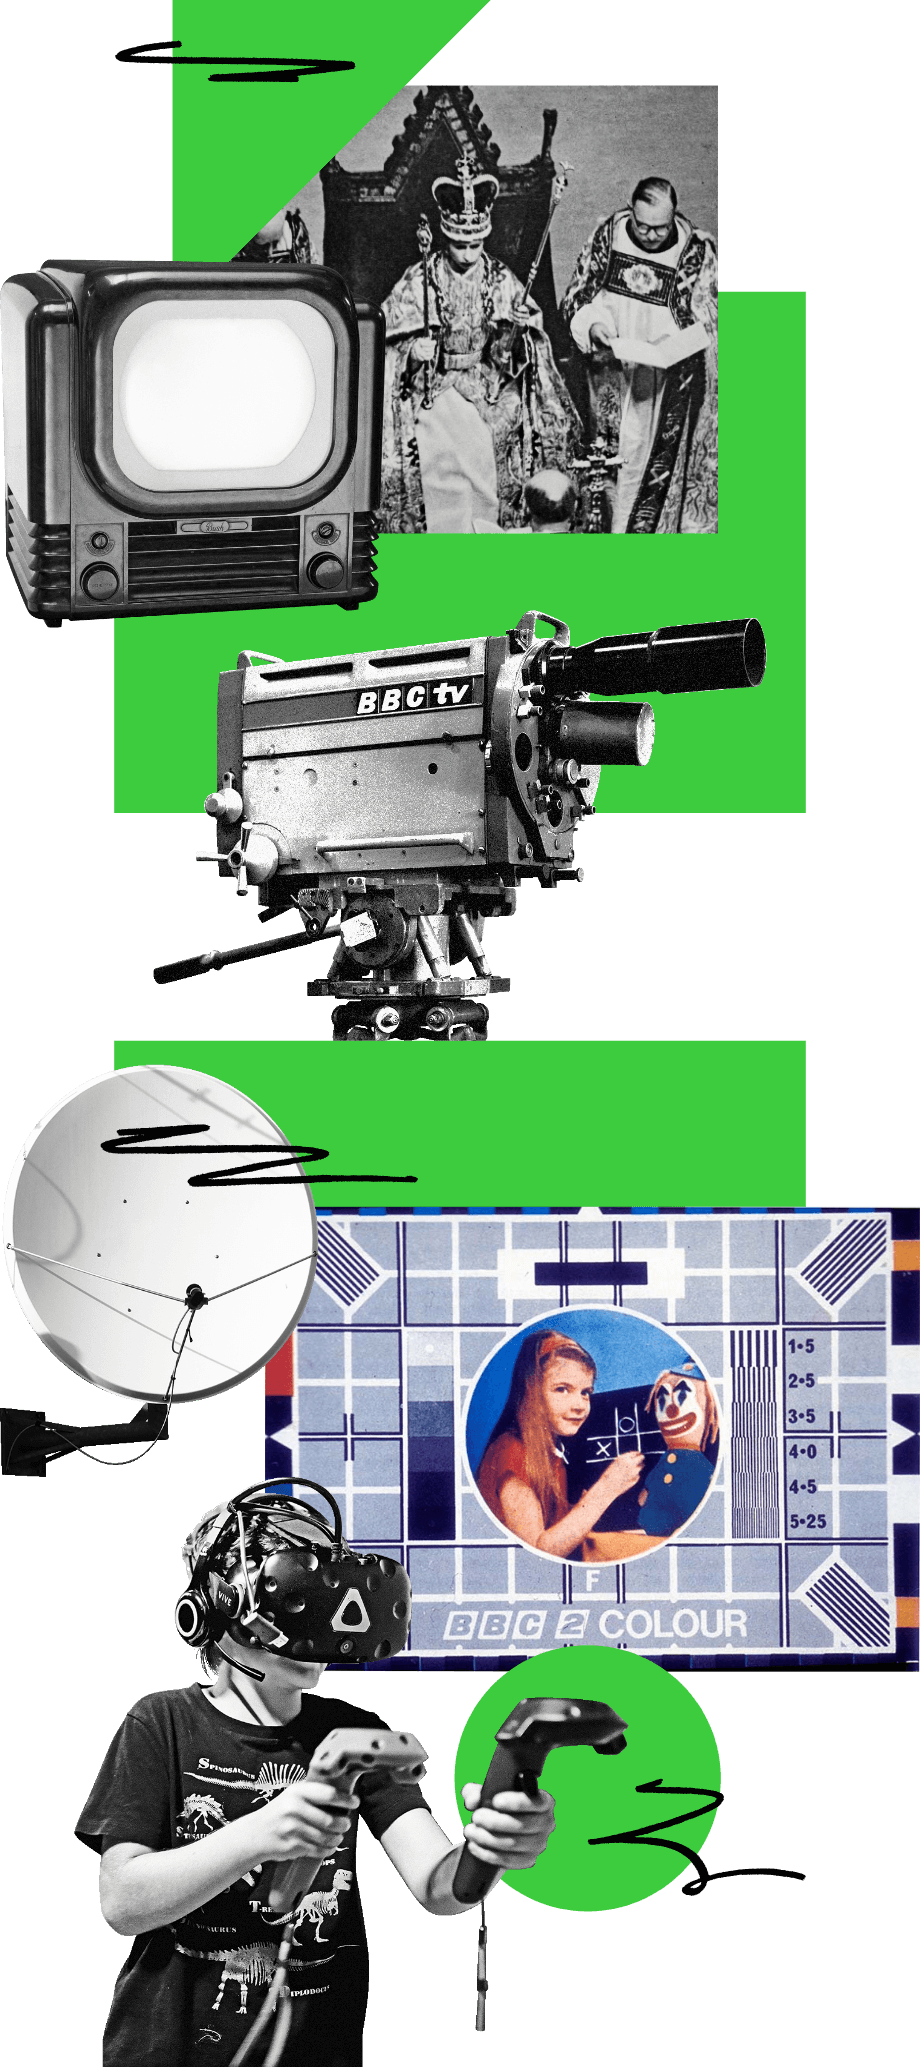 Composite image of a 1950s TV, the Queen's coronation, a vintage TV camera, the test card, a satellite dish and a VR headset